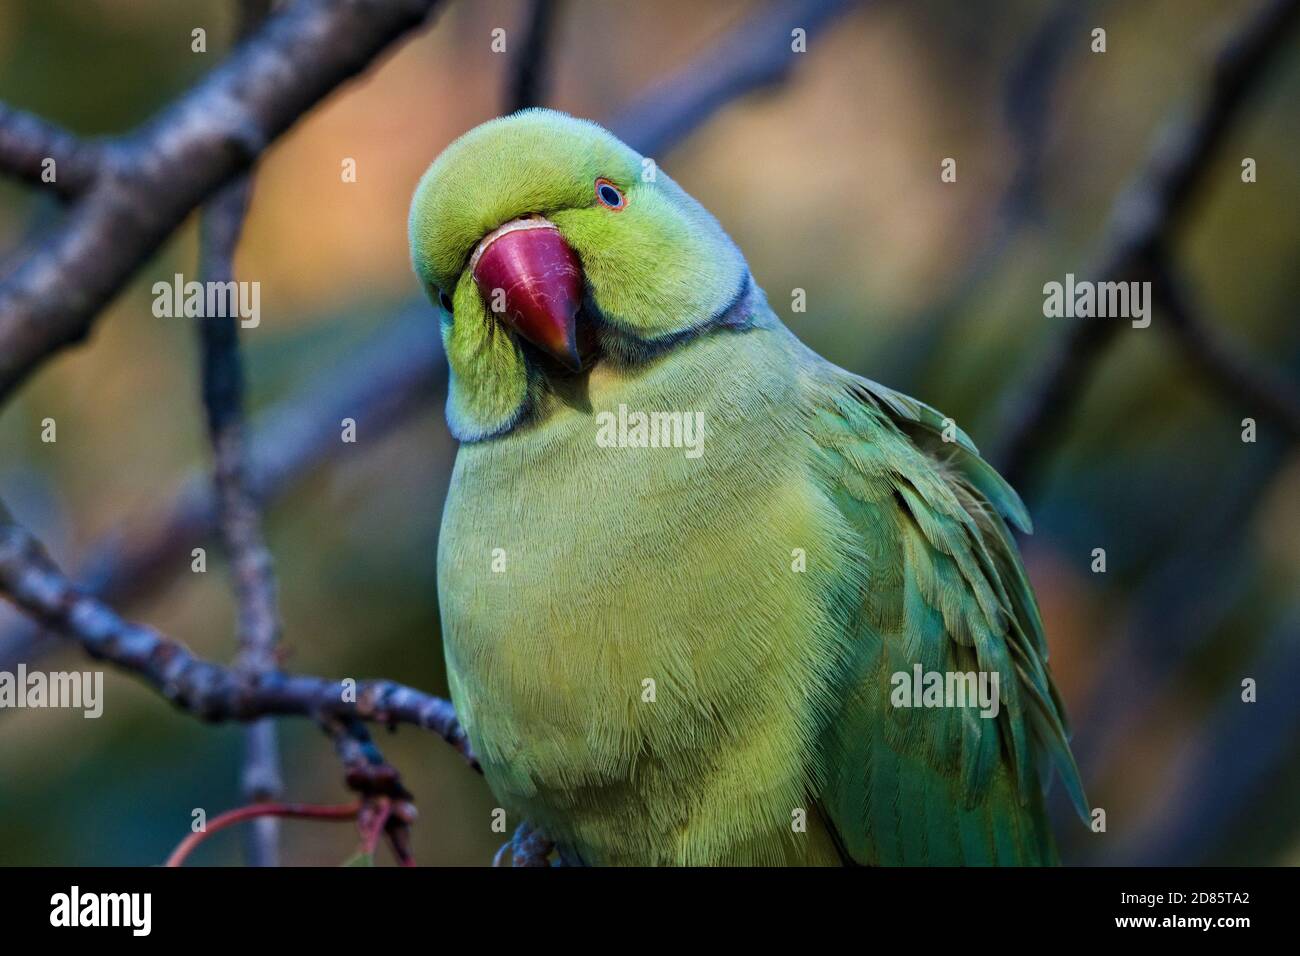 Green rose ringed parakeet, Psittacula krameri, up the treetops looking down at the camera with curiosity Stock Photo